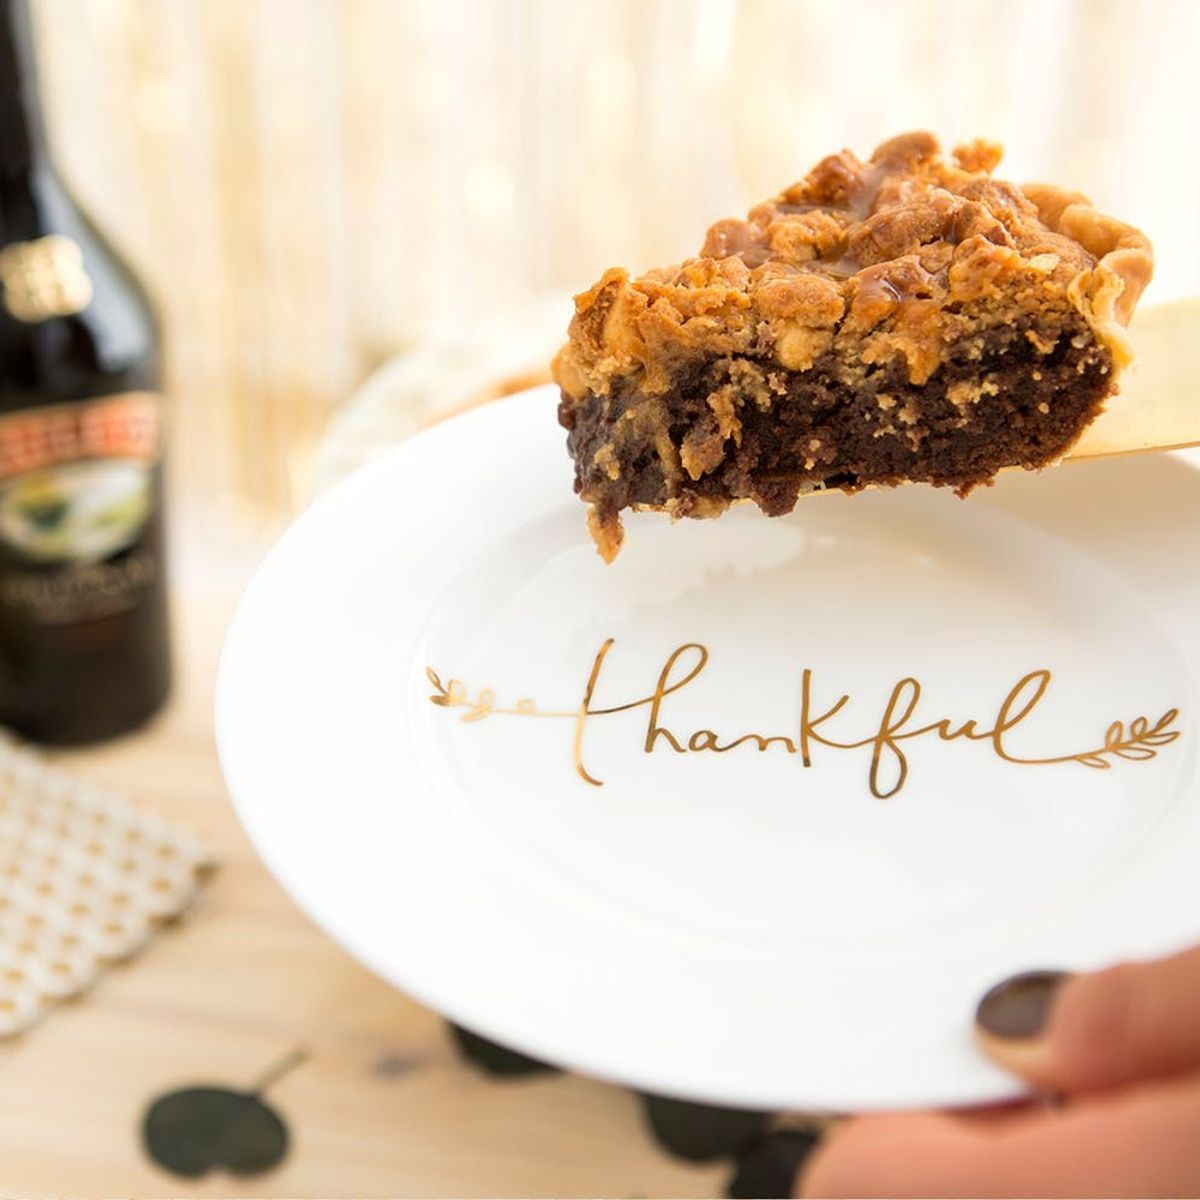 The Pie’s the Limit With This Friendsgiving Party